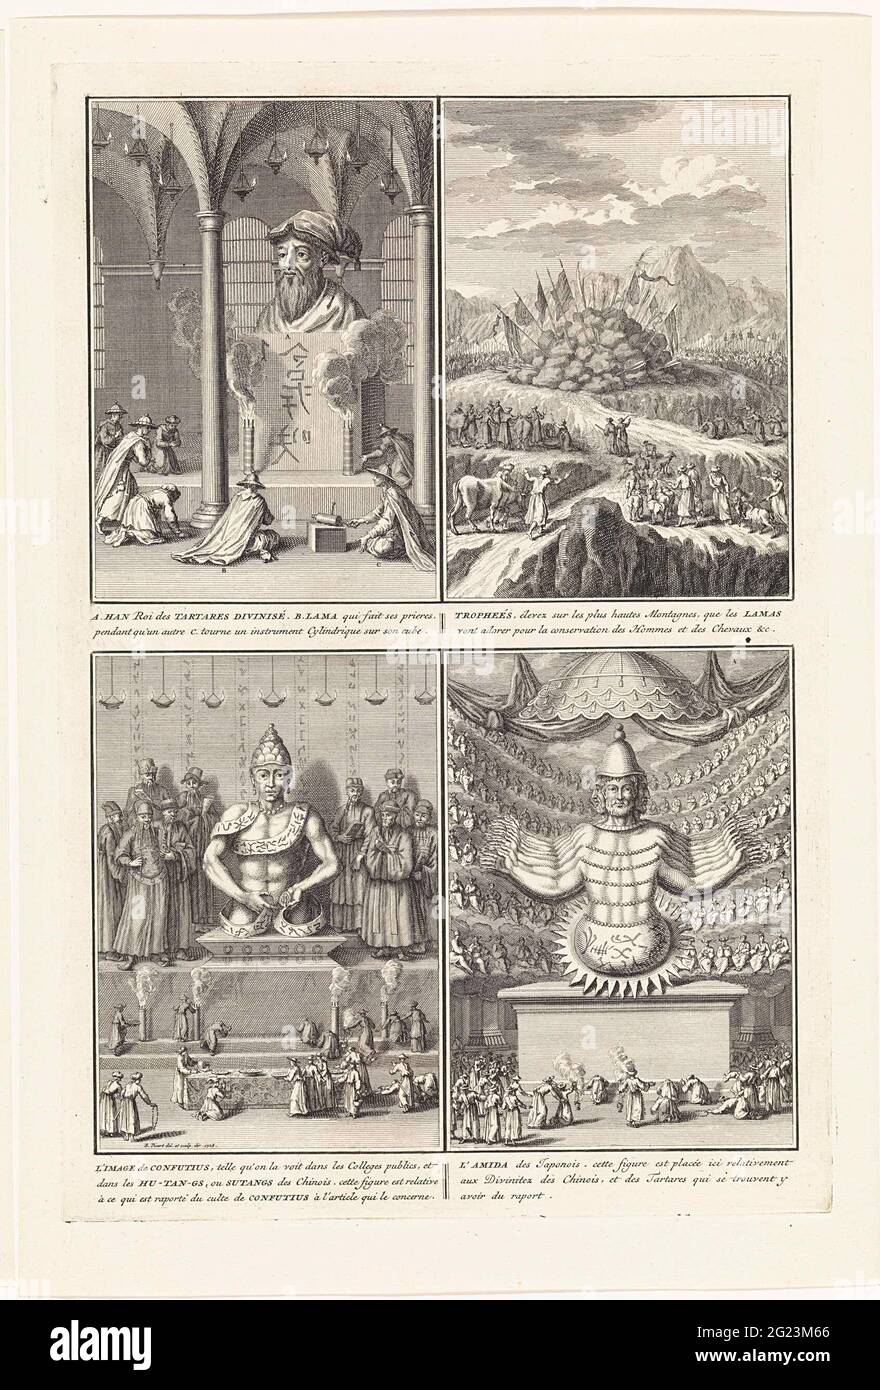 Gods and use in China and Japan; Han ROI des Tartares Divinisé (...). Leaf with four performances of Buddhist gods, confusius and use in China. Top left: Image of Han, king of the people tangut. A lama or priest kneel for him. At the top right: Lamas pray at flags in the mountains. Bottom left: Image and worship of Confusius. Bottom right: the Japanese God Amida. Stock Photo